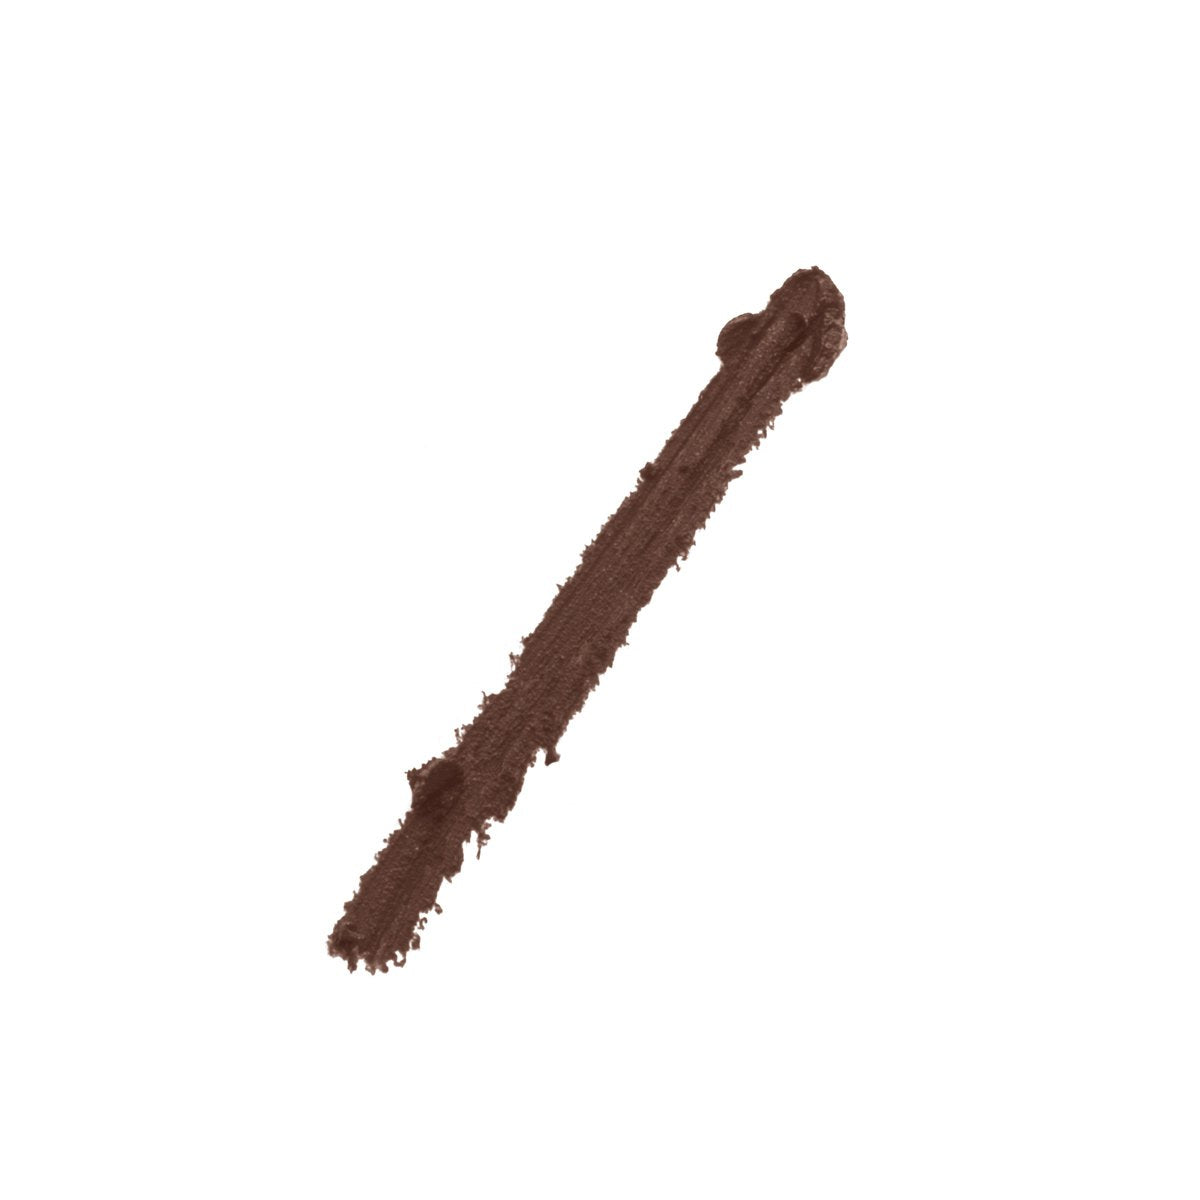 ENTICELLE - COPPER - swatch of smoky copper eye pencil